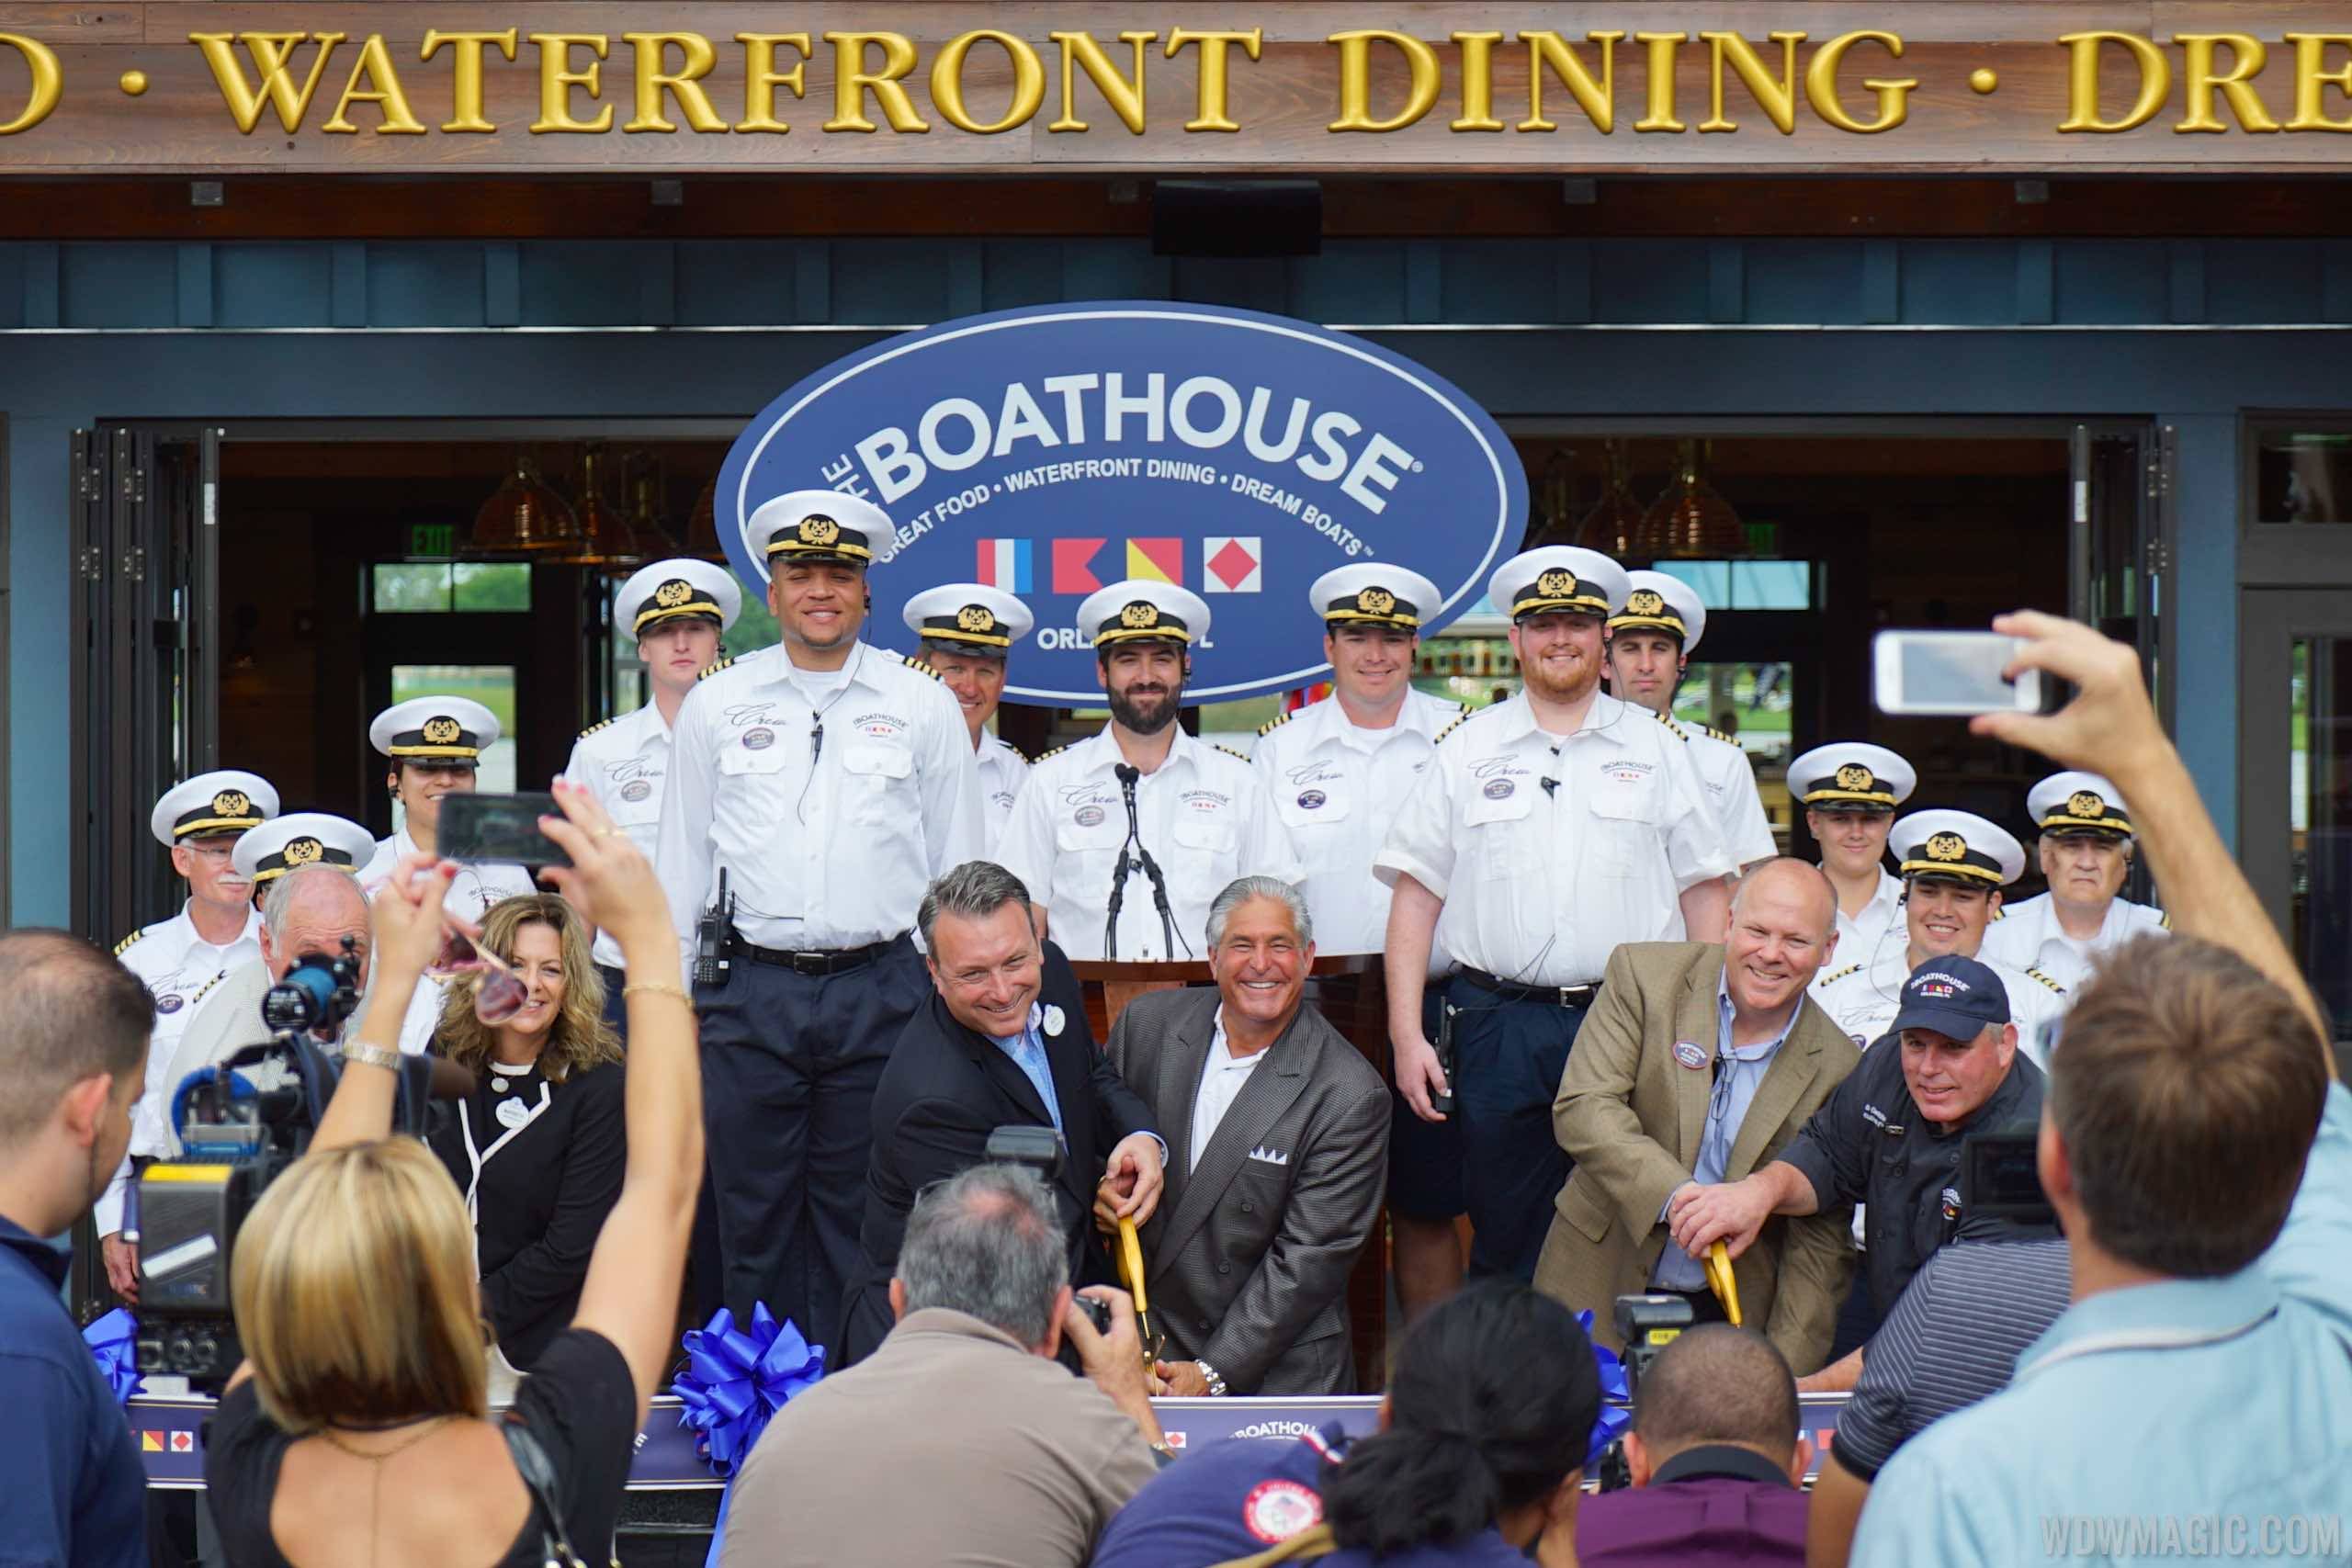 The BOATHOUSE - Grand opening ribbon cutting